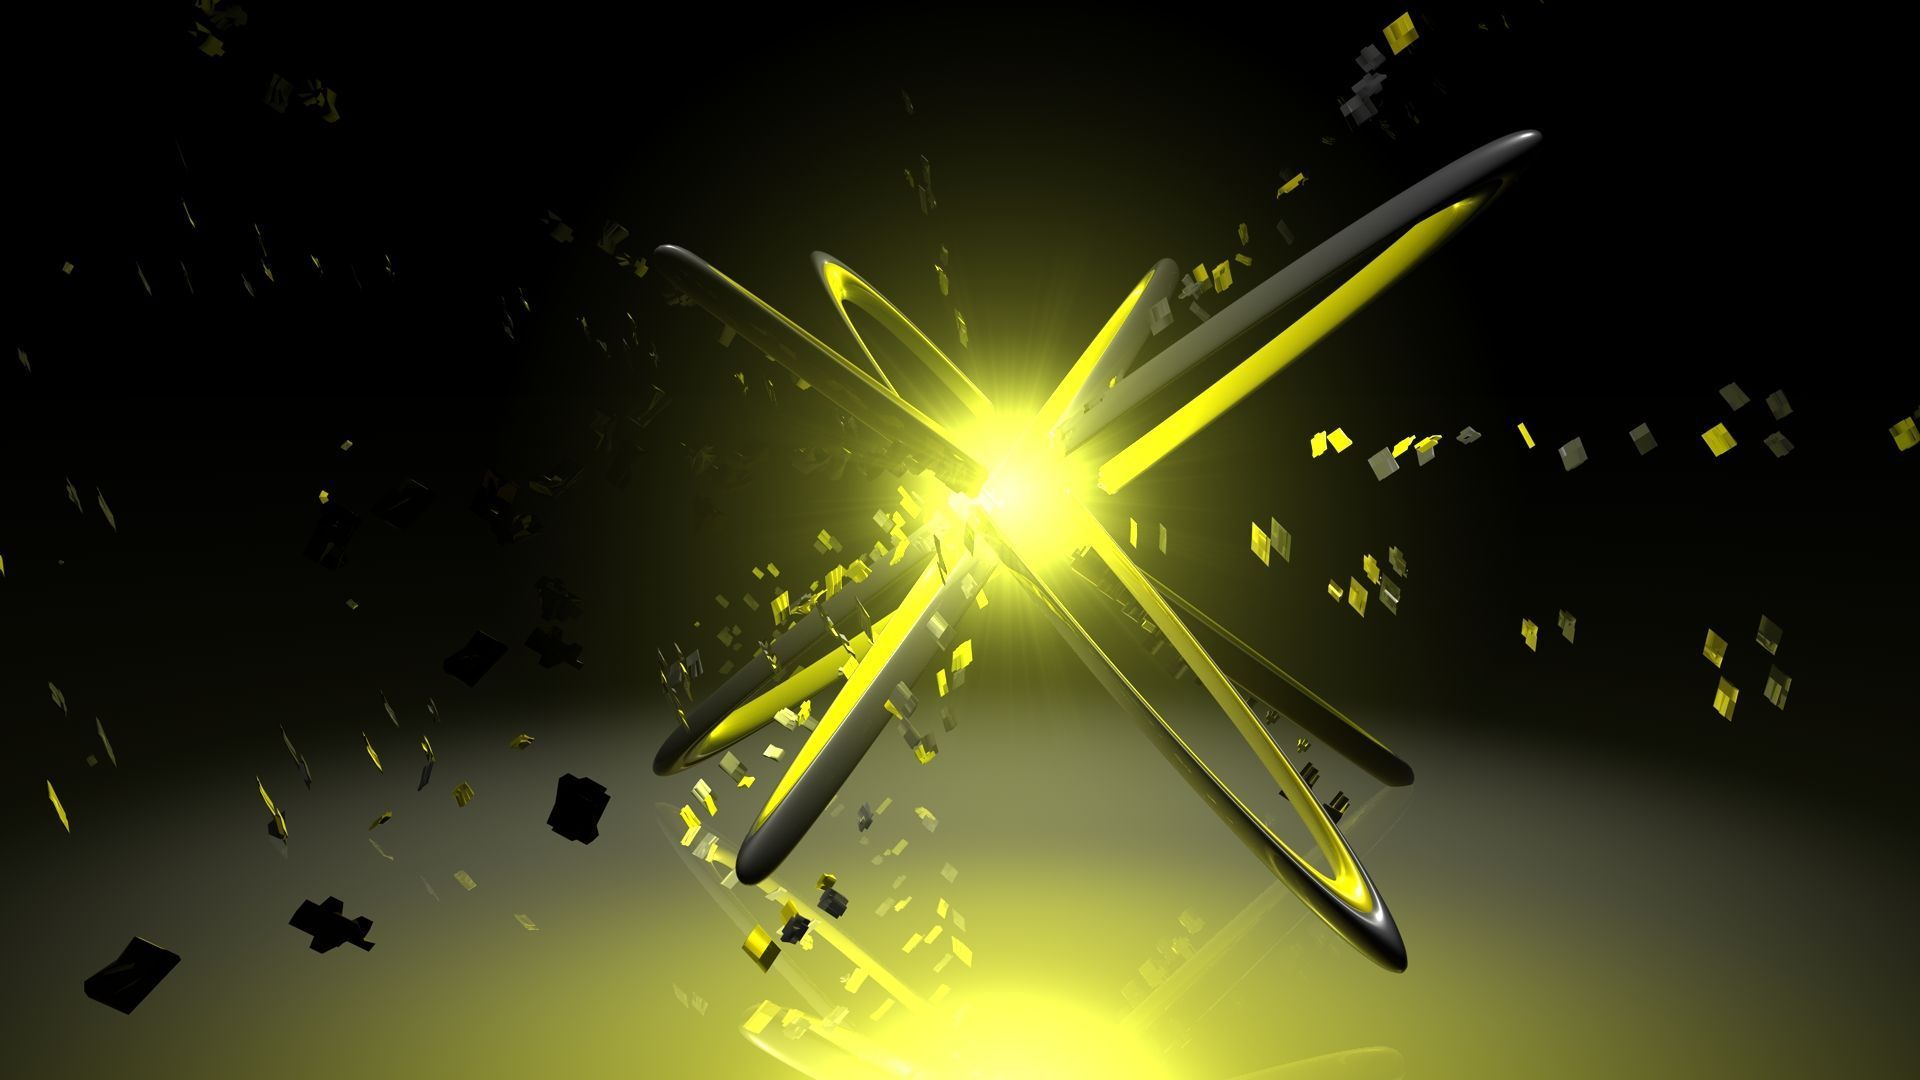 Black and Yellow Wallpapers 2489 - HD Wallpapers Site